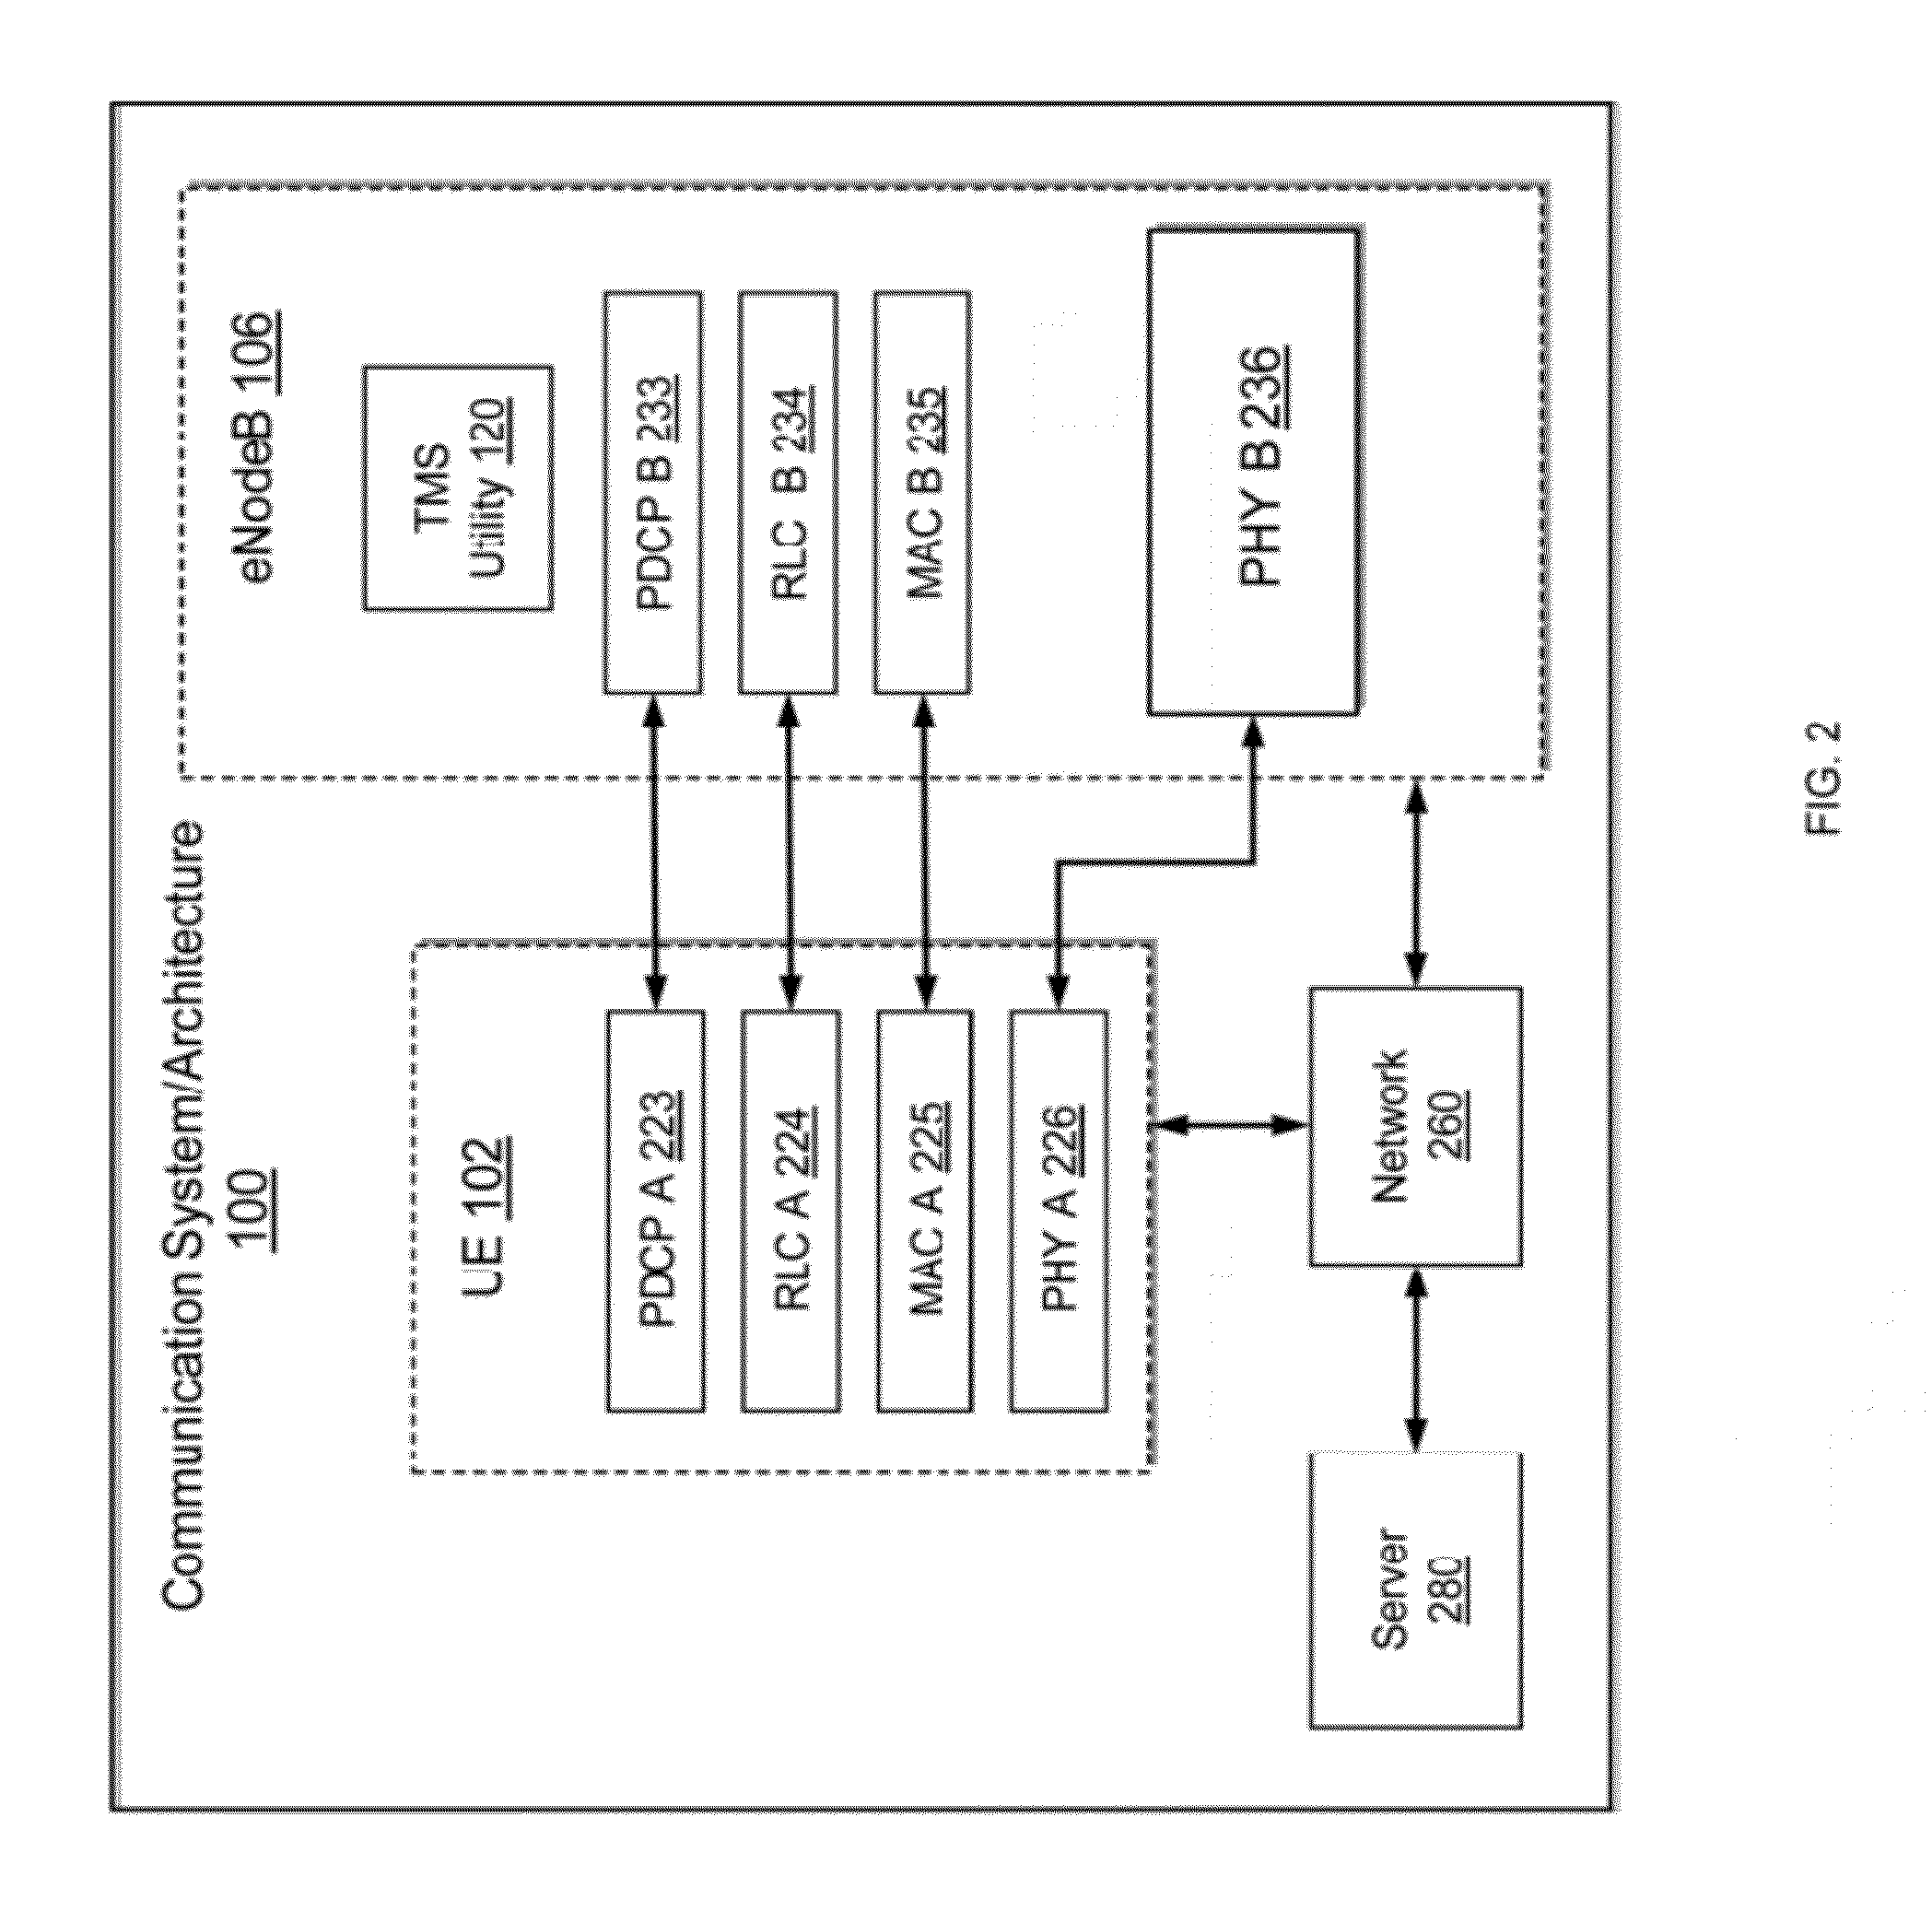 Downlink pdsch transmission mode selection and switching algorithm for LTE